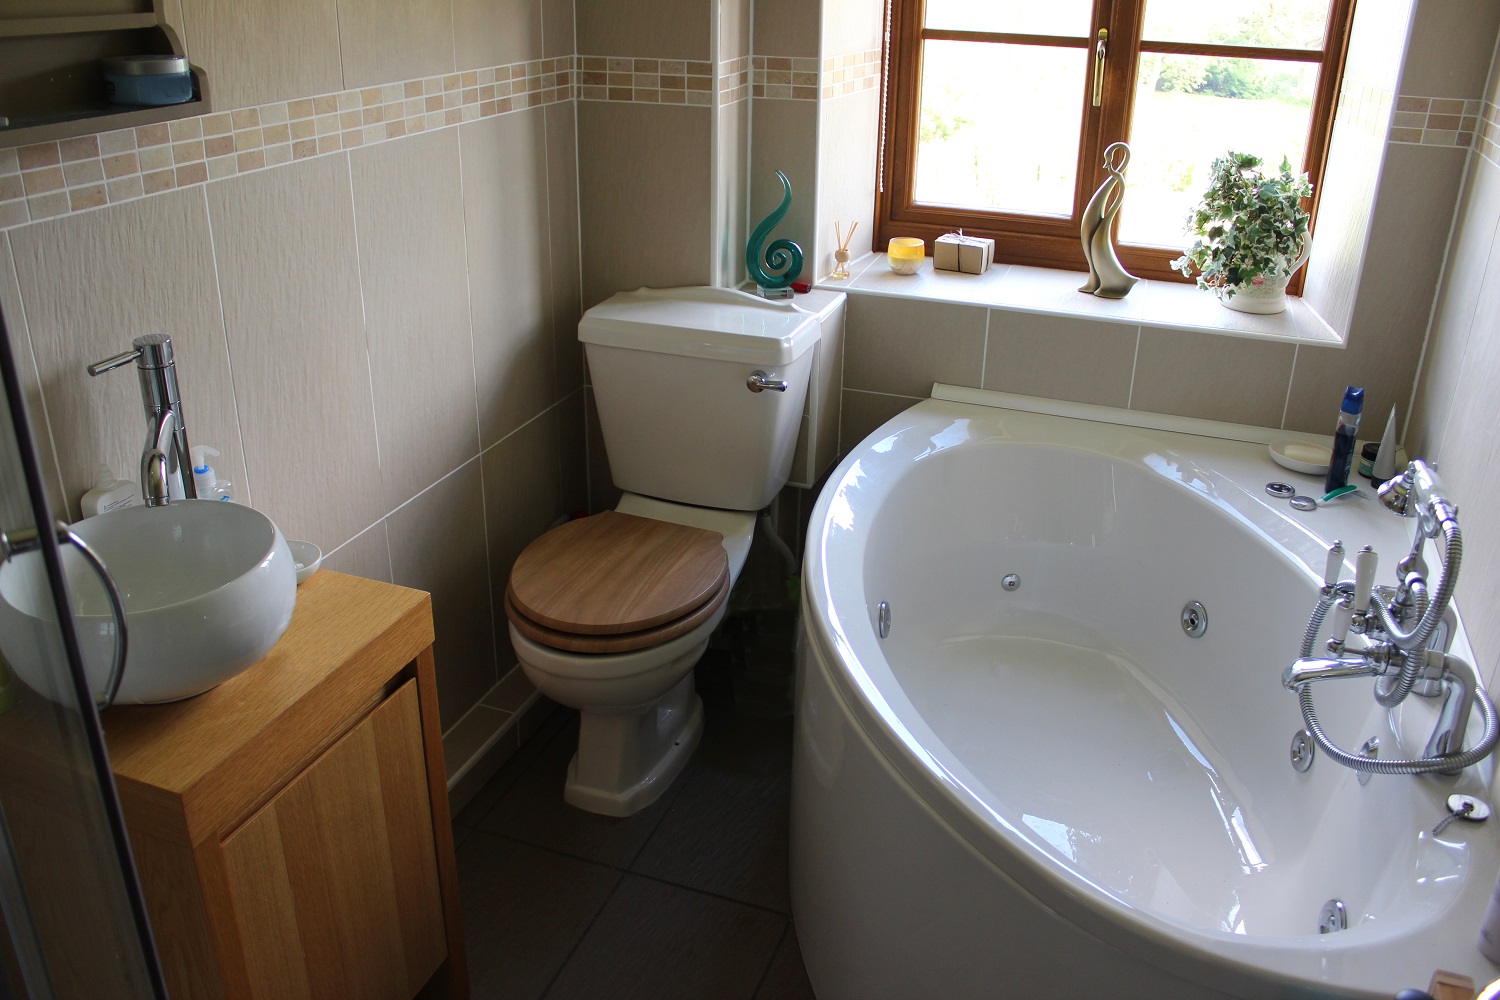 Lifestyle image of a small bathroom with corner bath and toilet